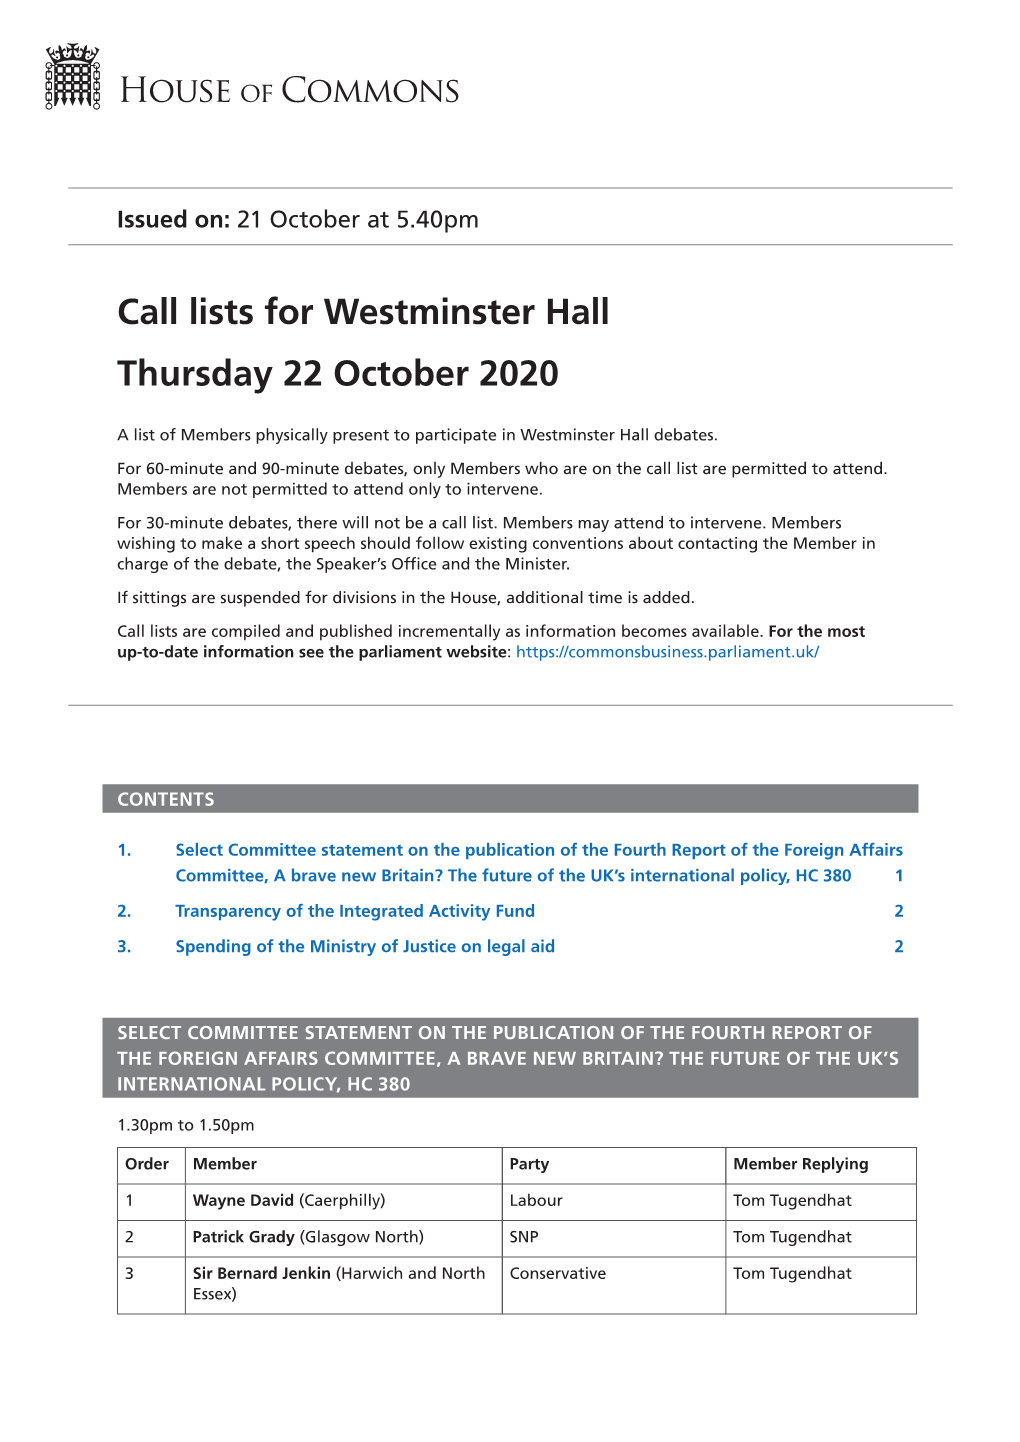 Call List for Thu 22 Oct 2020